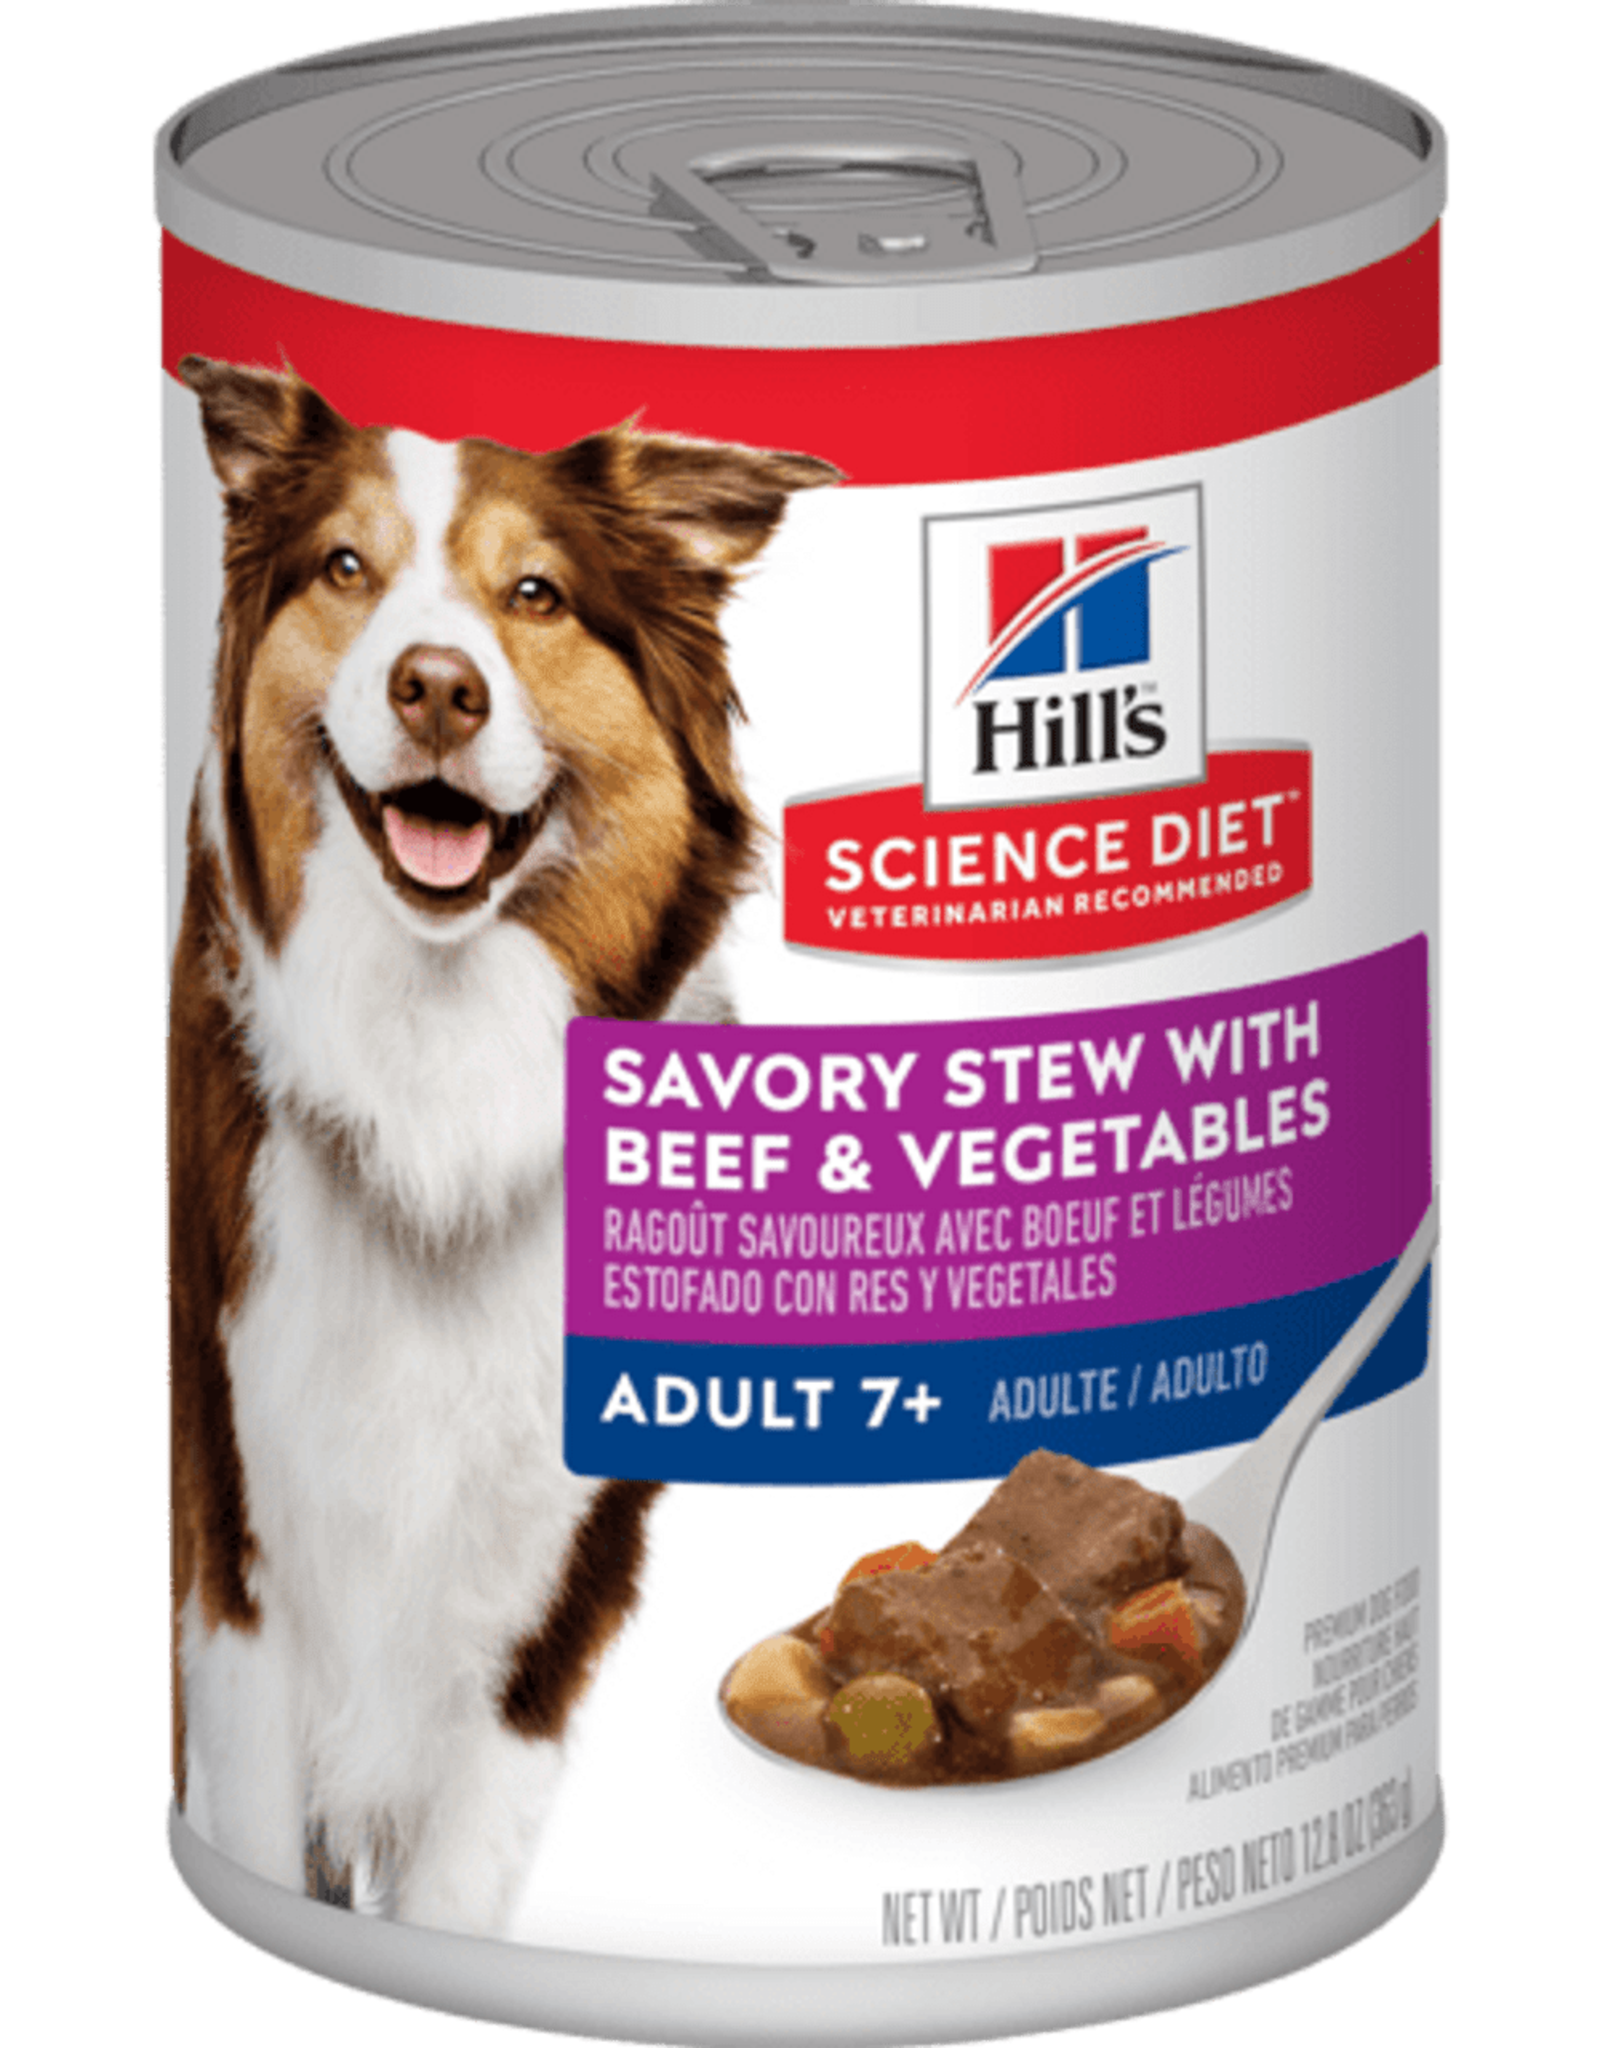 SCIENCE DIET HILL'S SCIENCE DIET DOG MATURE SAVORY STEW BEEF & VEGETABLES CAN 12.8OZ CASE OF 12